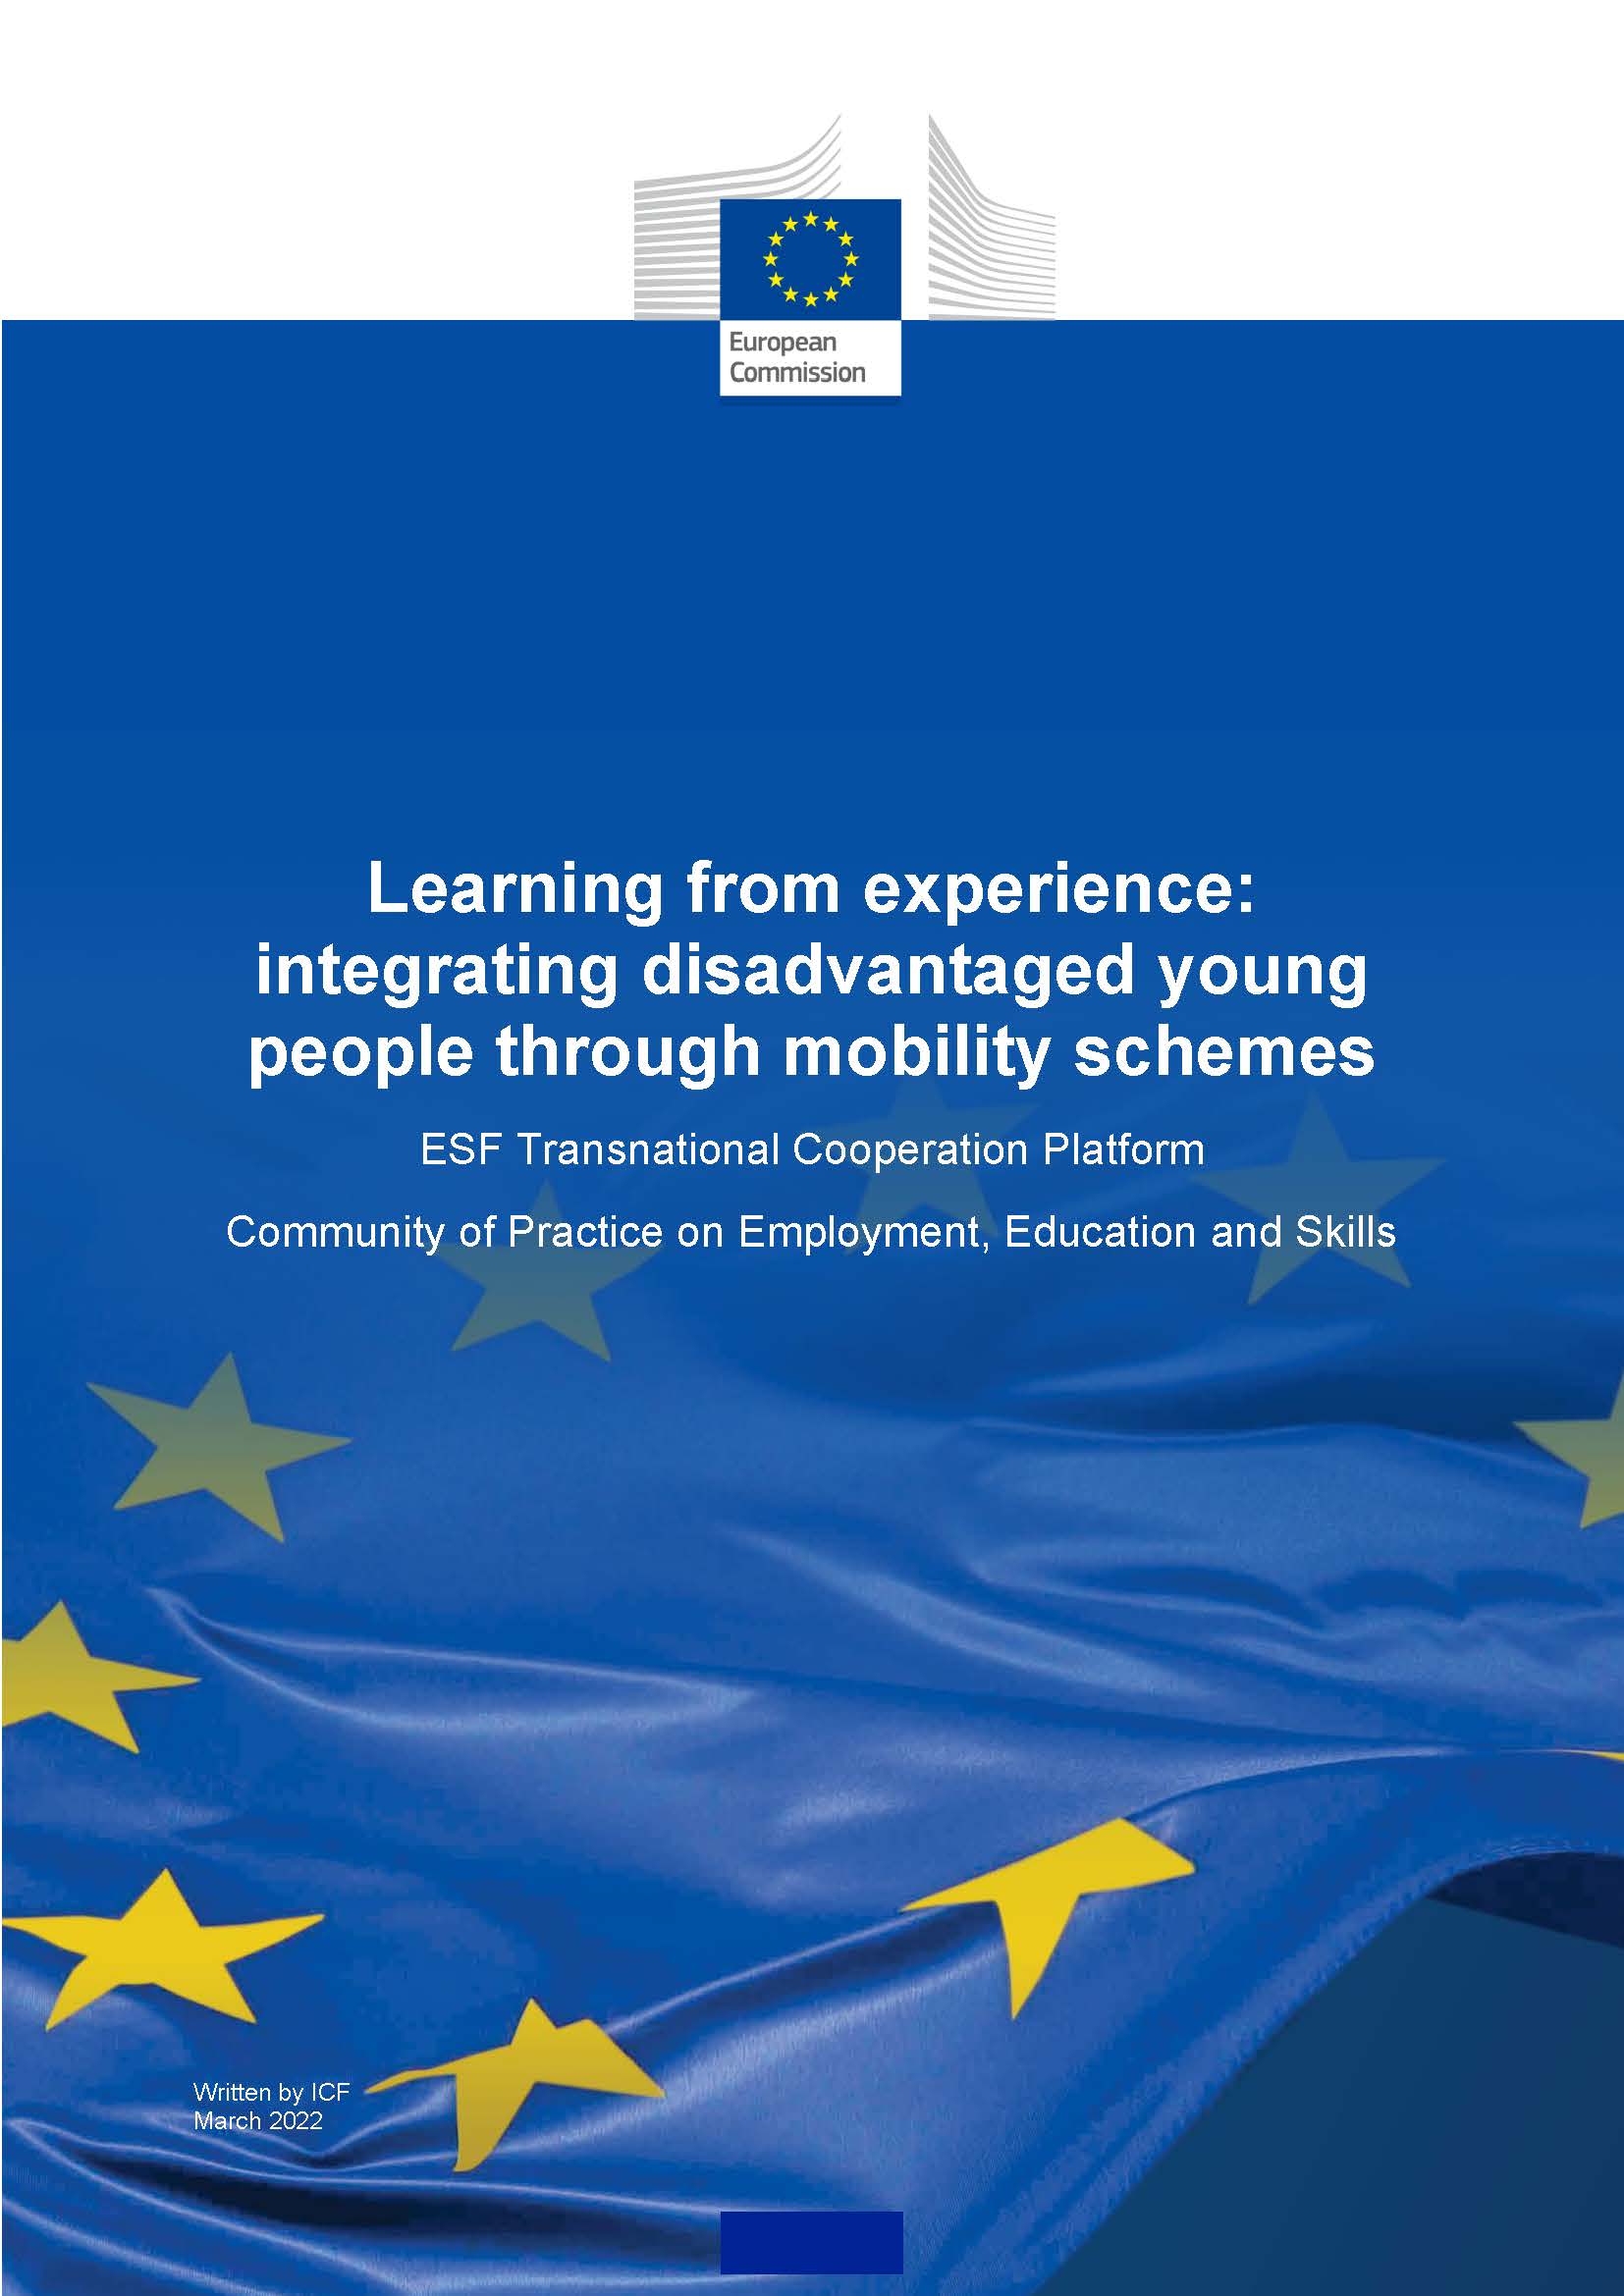 Learning from experience: integrating disadvantaged young people through mobility schemes